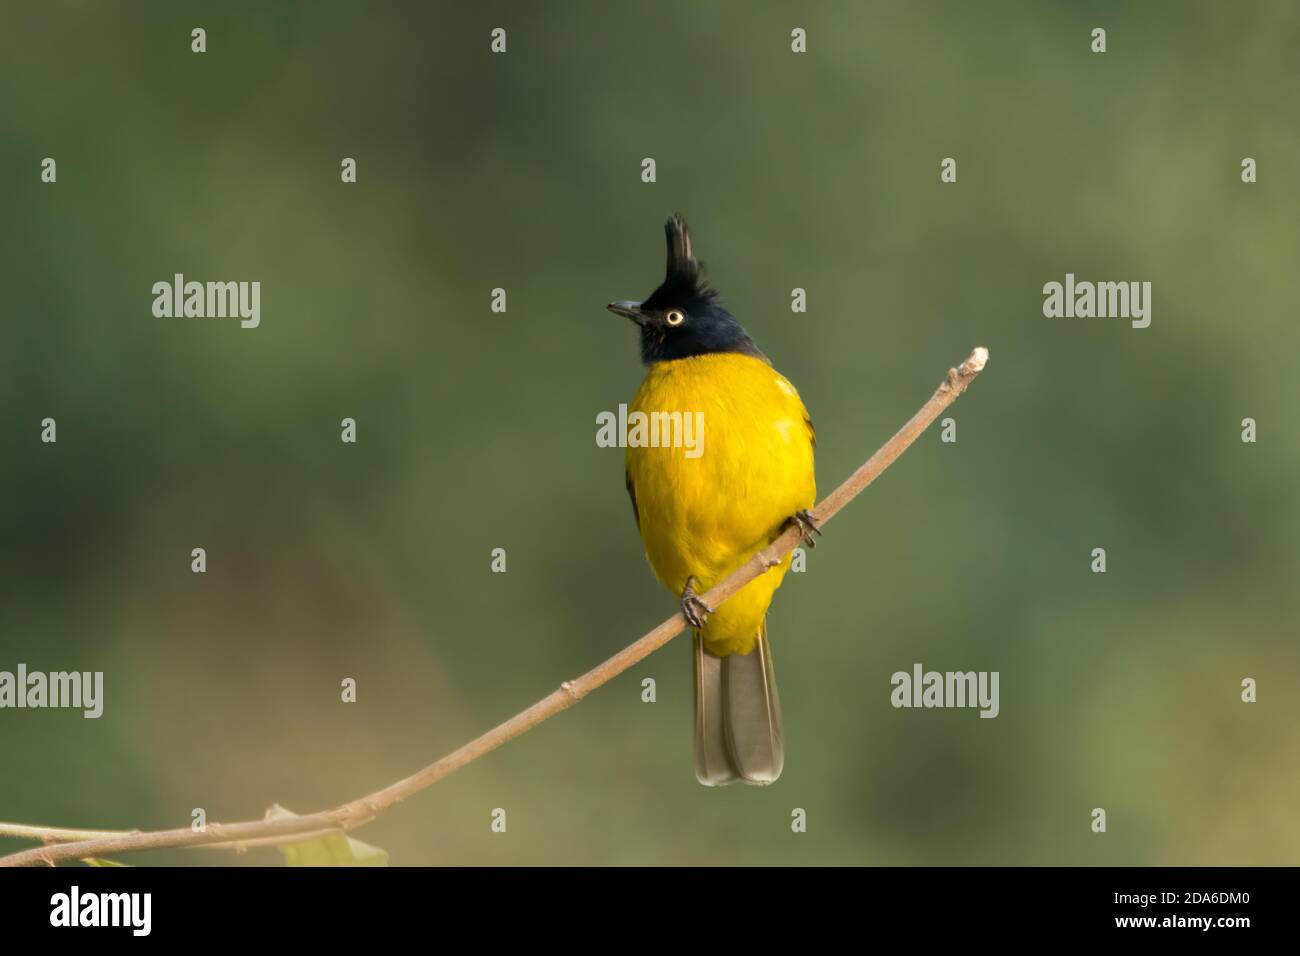 Black-crested Bulbul (Pycnonotus flaviventris), on a perch, in the forests of Ramnagar in Uttarakhand, India. Stock Photo